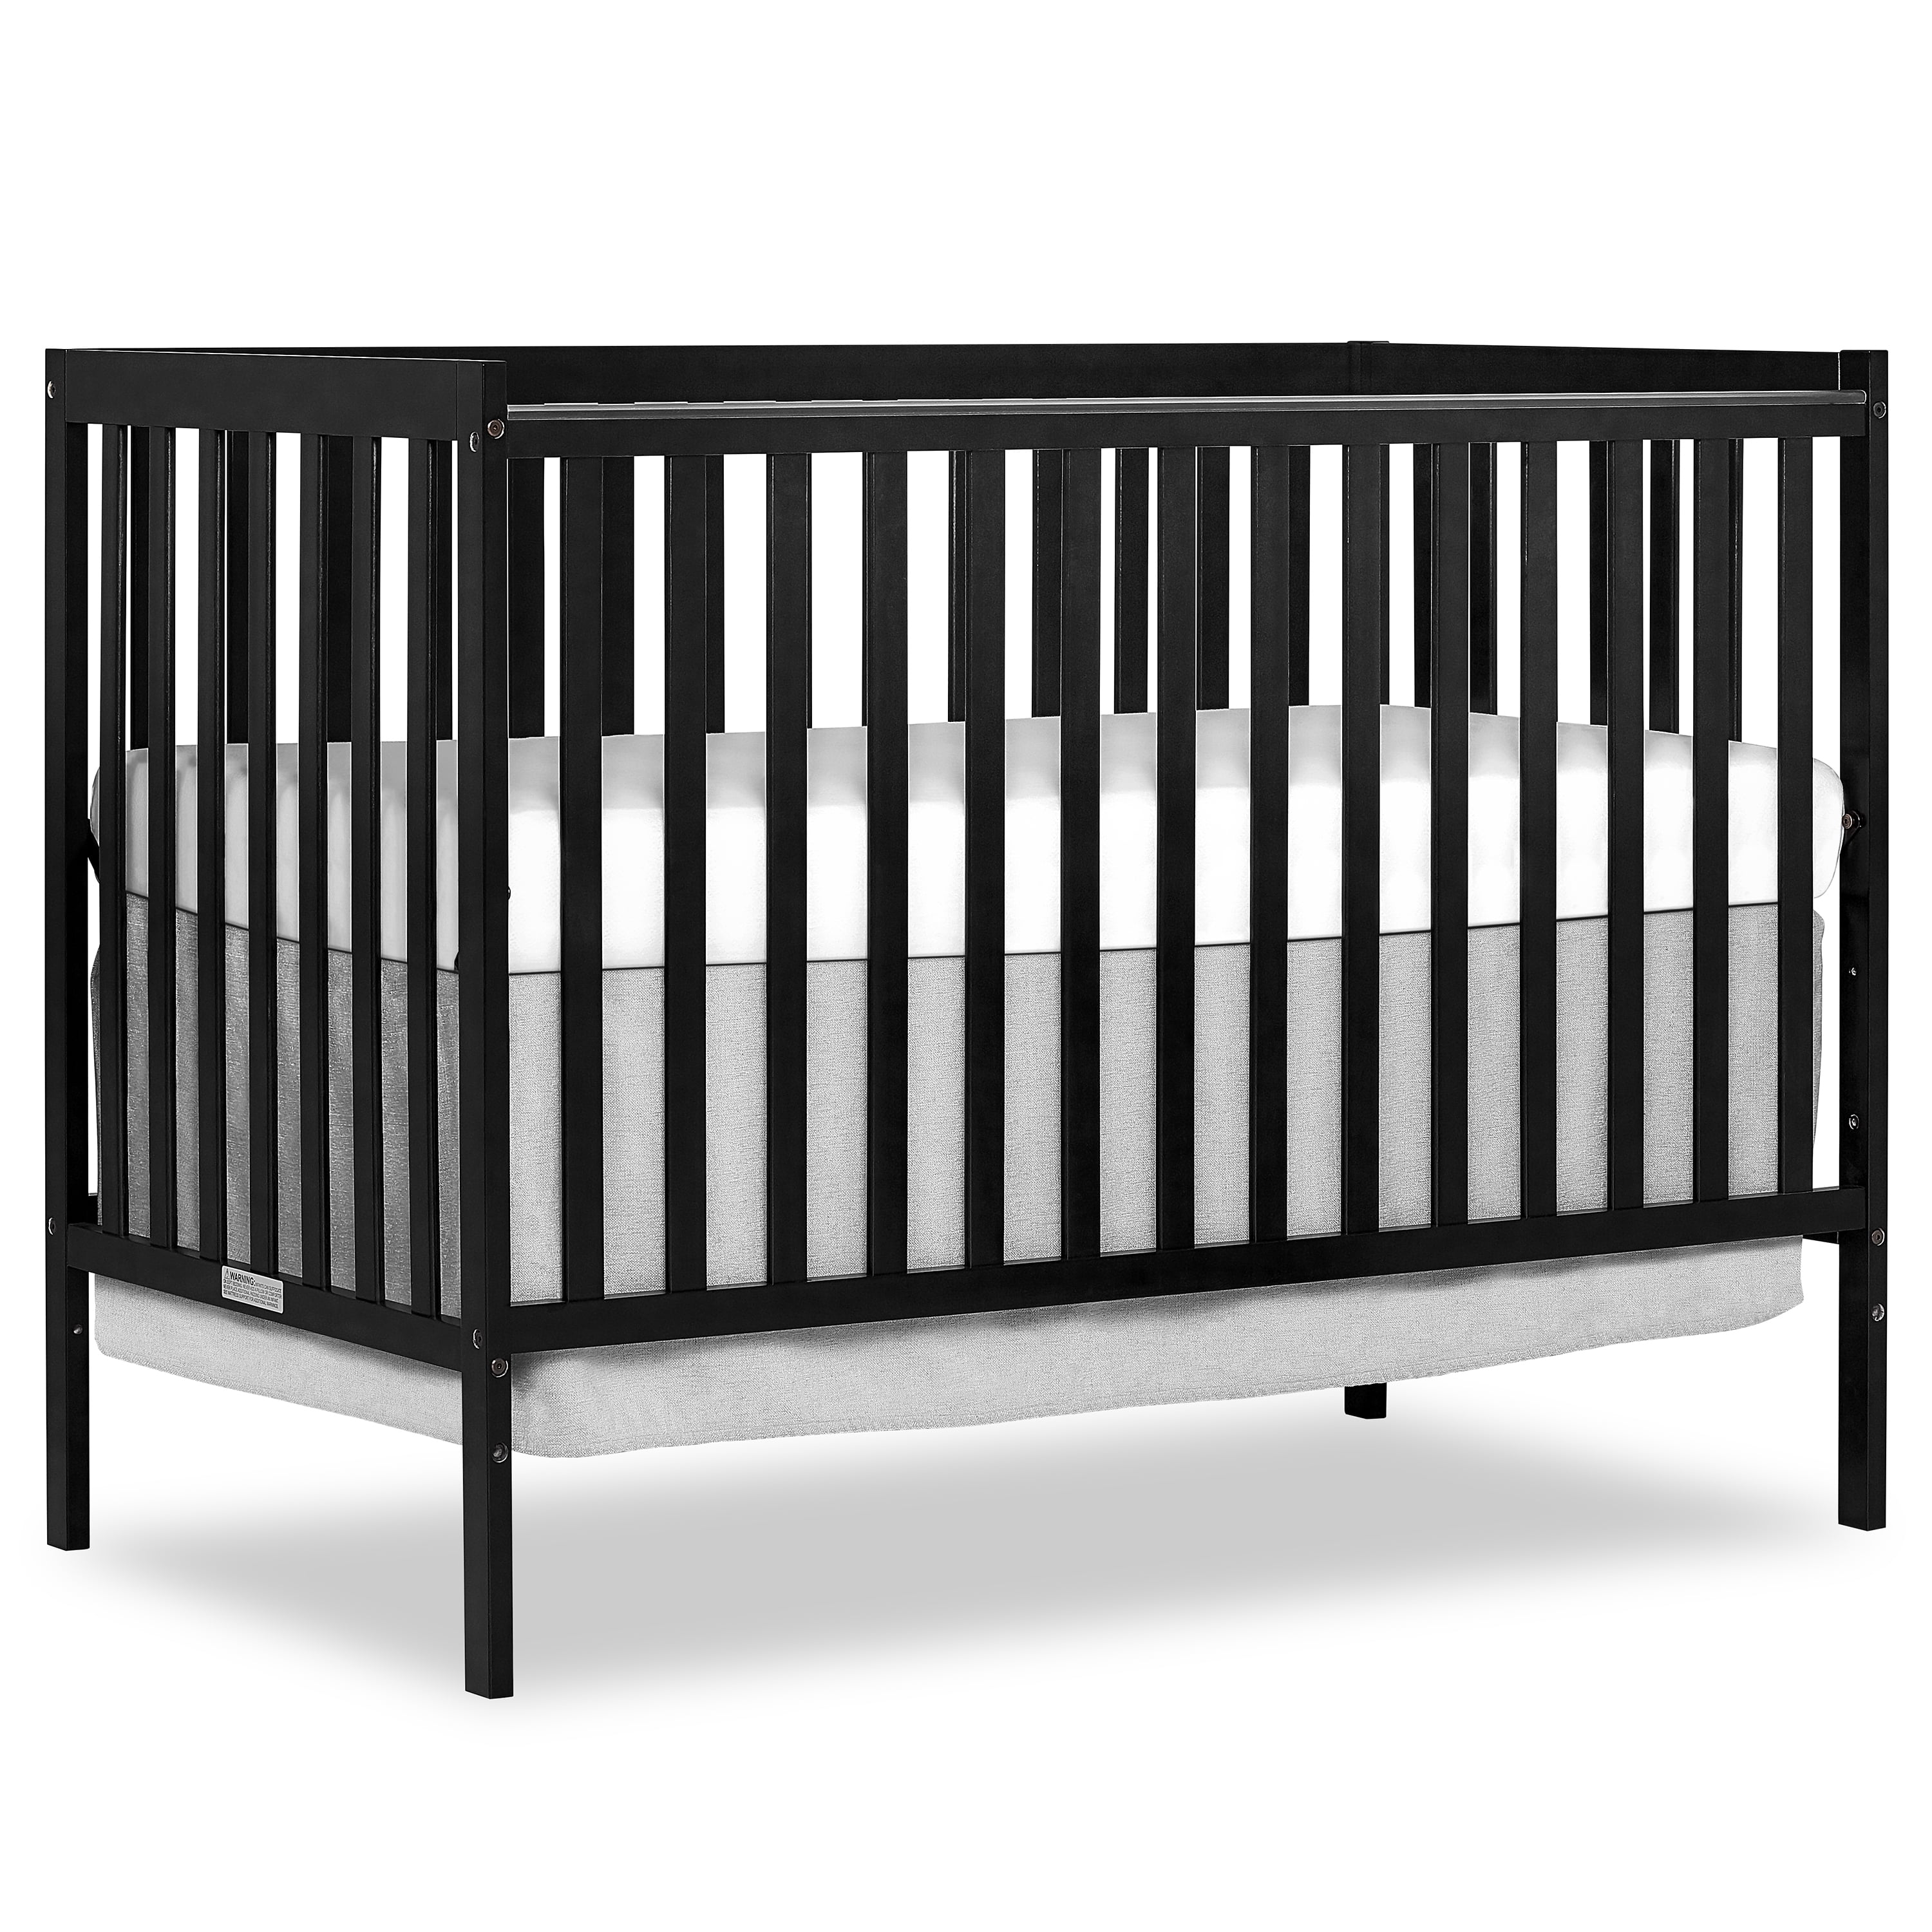 Photo 1 of **LOOSE HARDWARE, MAY BE INCOMPLETE**
Dream On Me Synergy 5-in-1 Convertible Crib Black